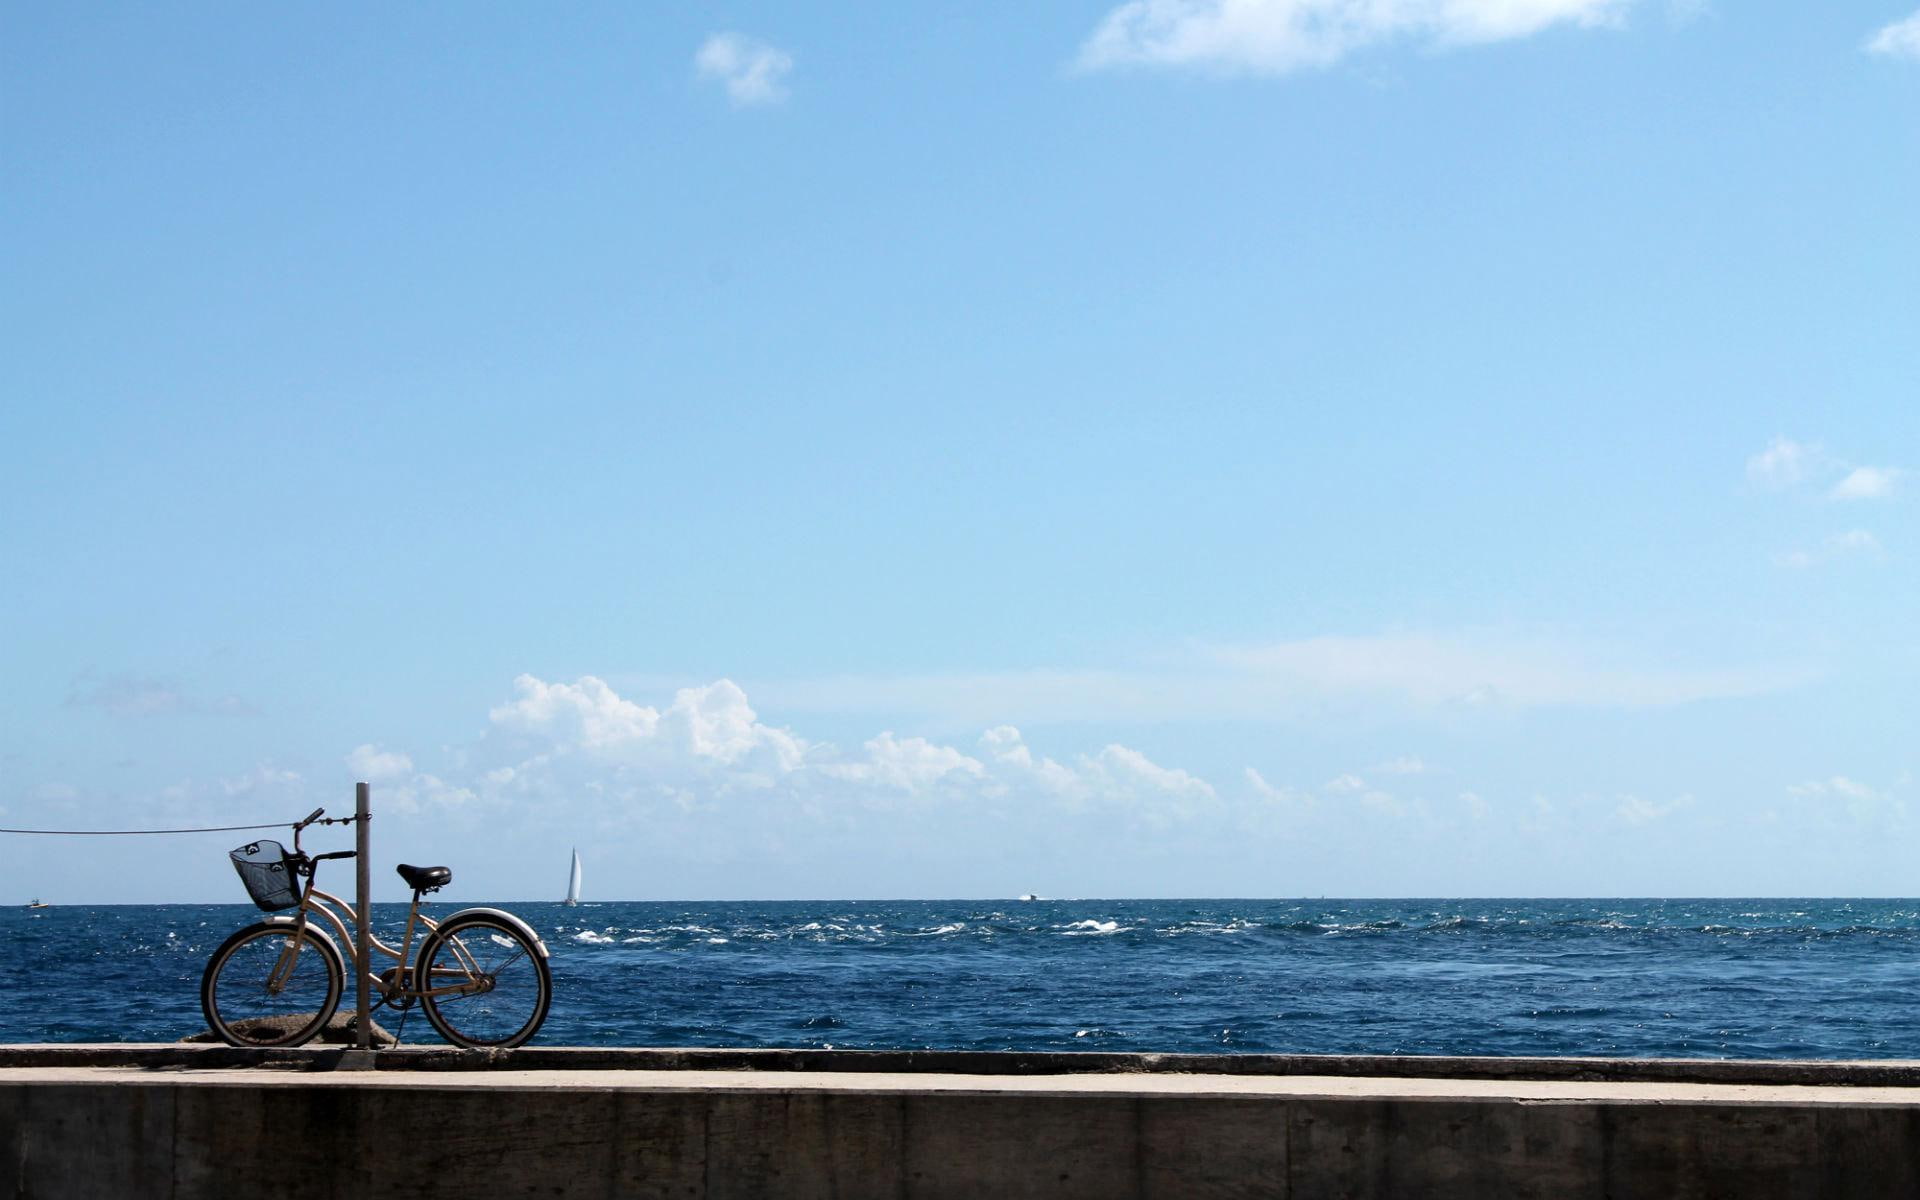 Bicycle on the pier, silver cruiser bike, photography, 1920x1200